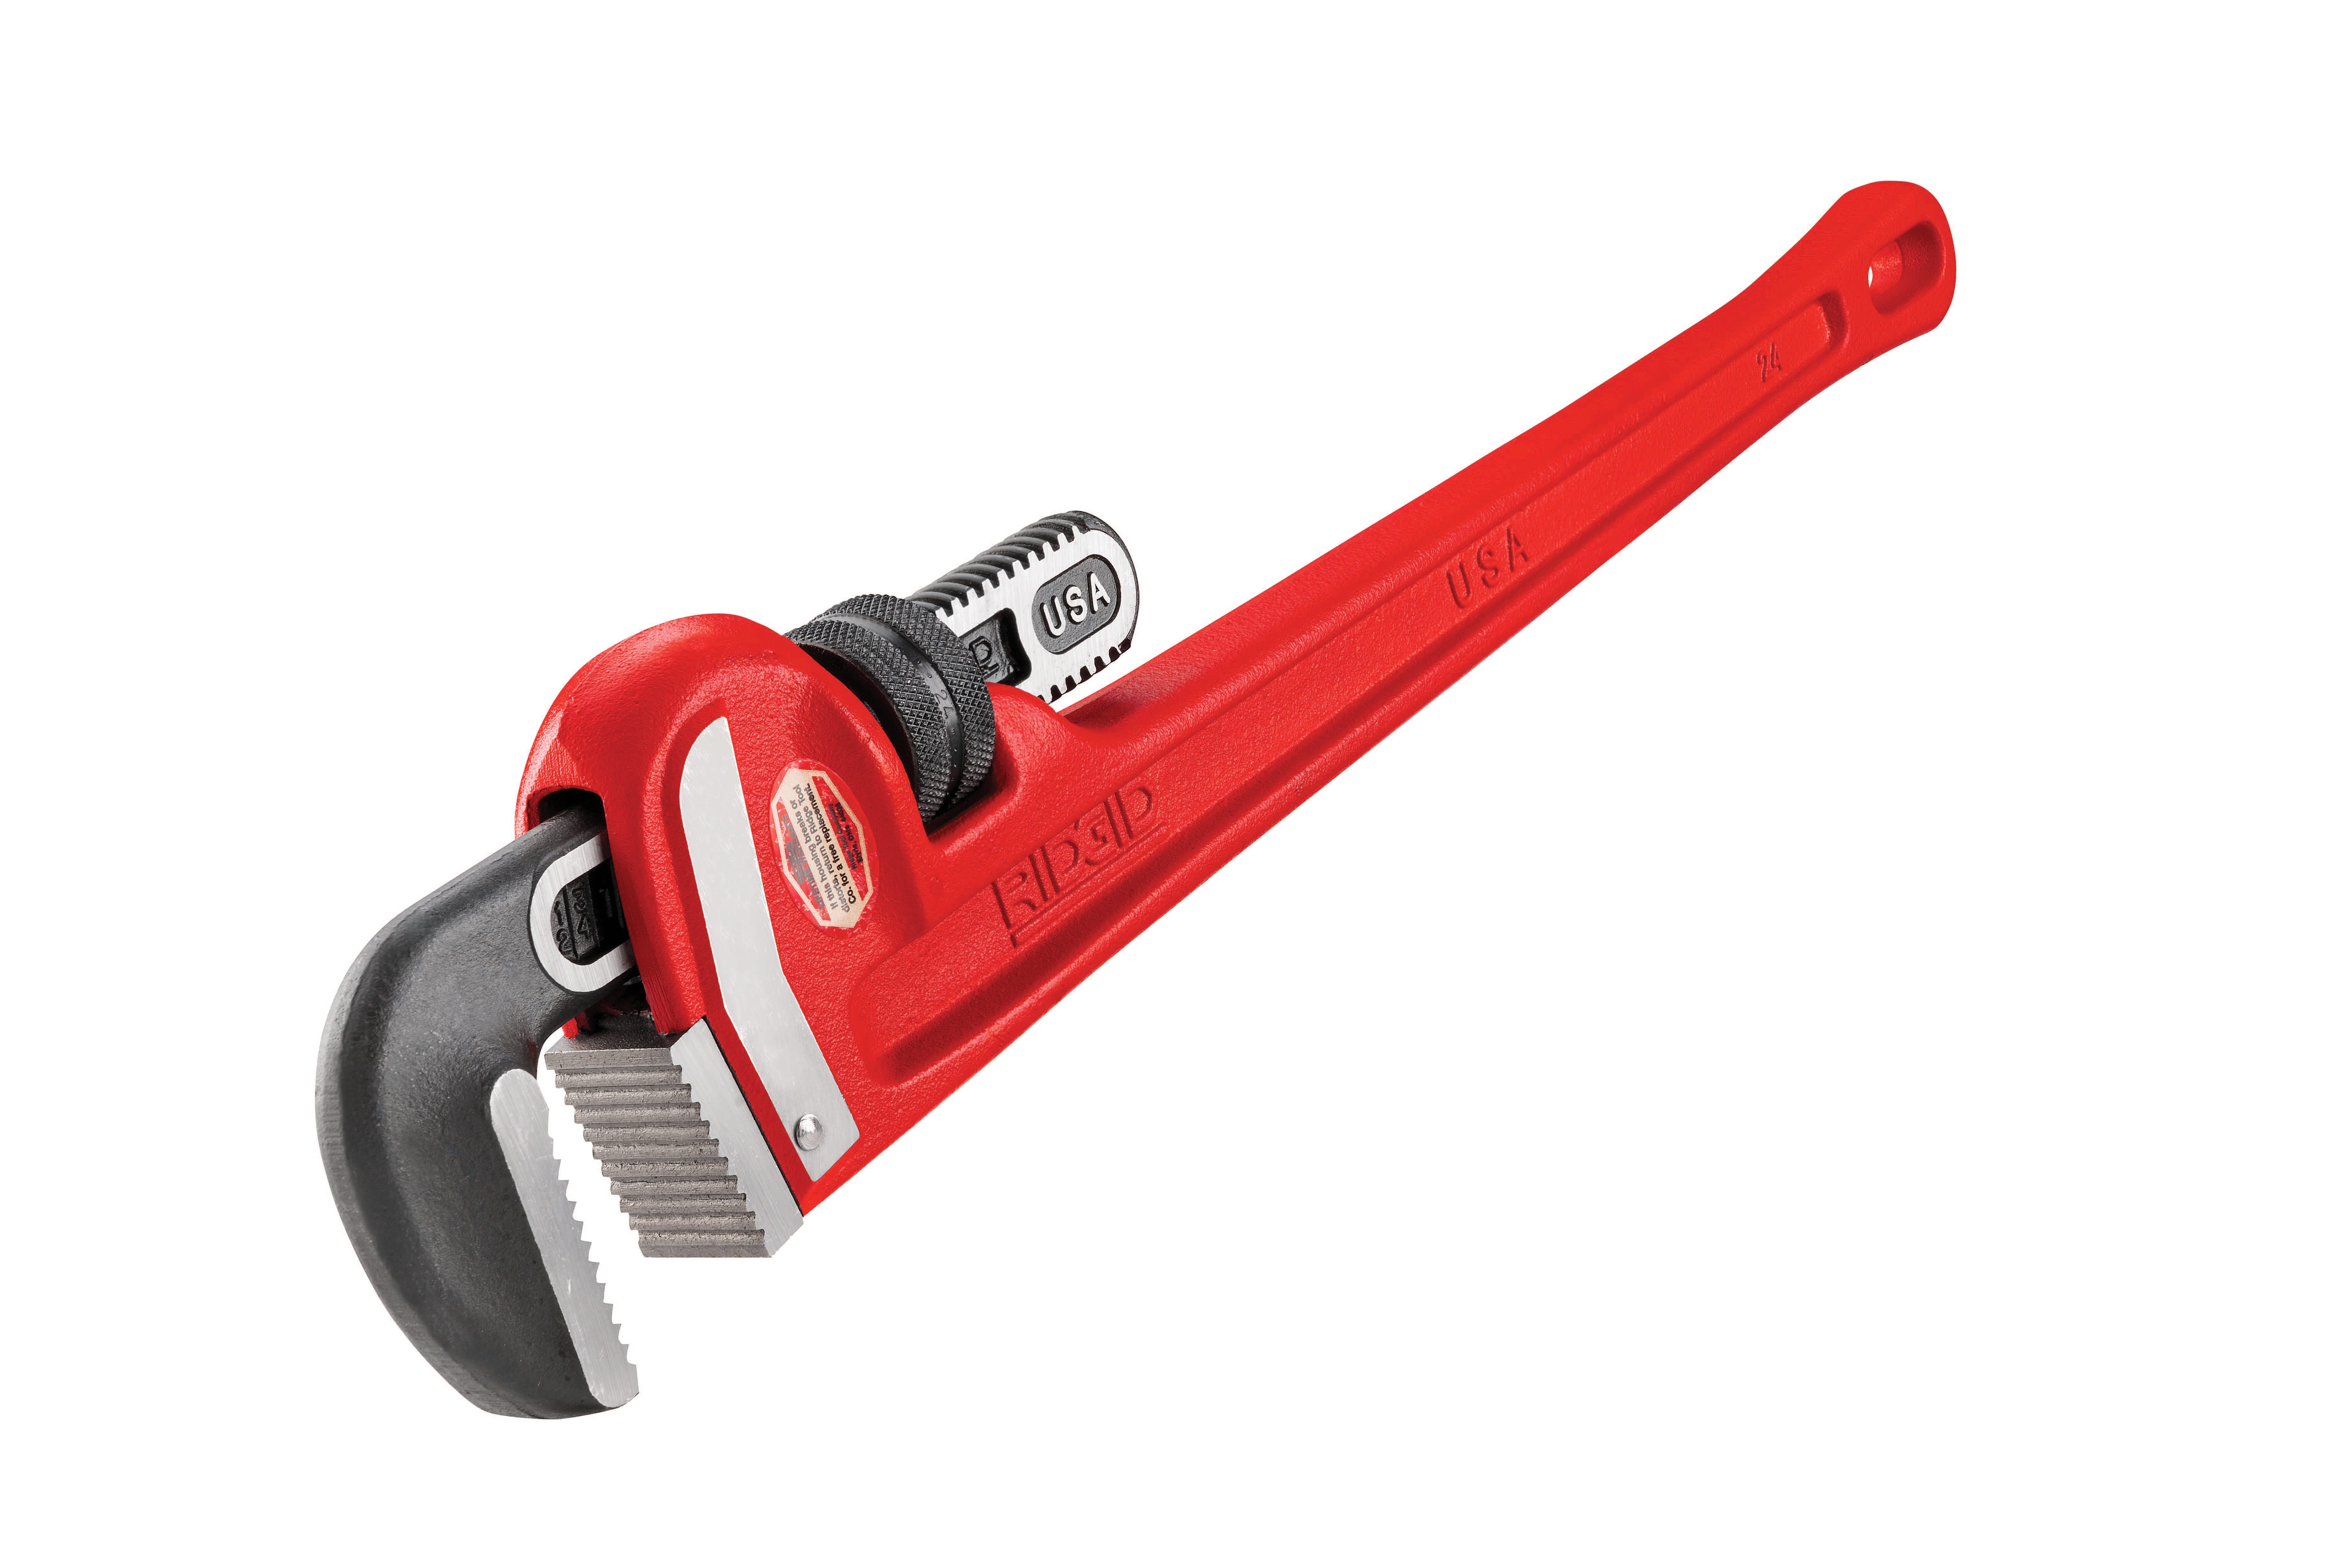 31030 24-in Heavy-Duty Straight Pipe Wrench